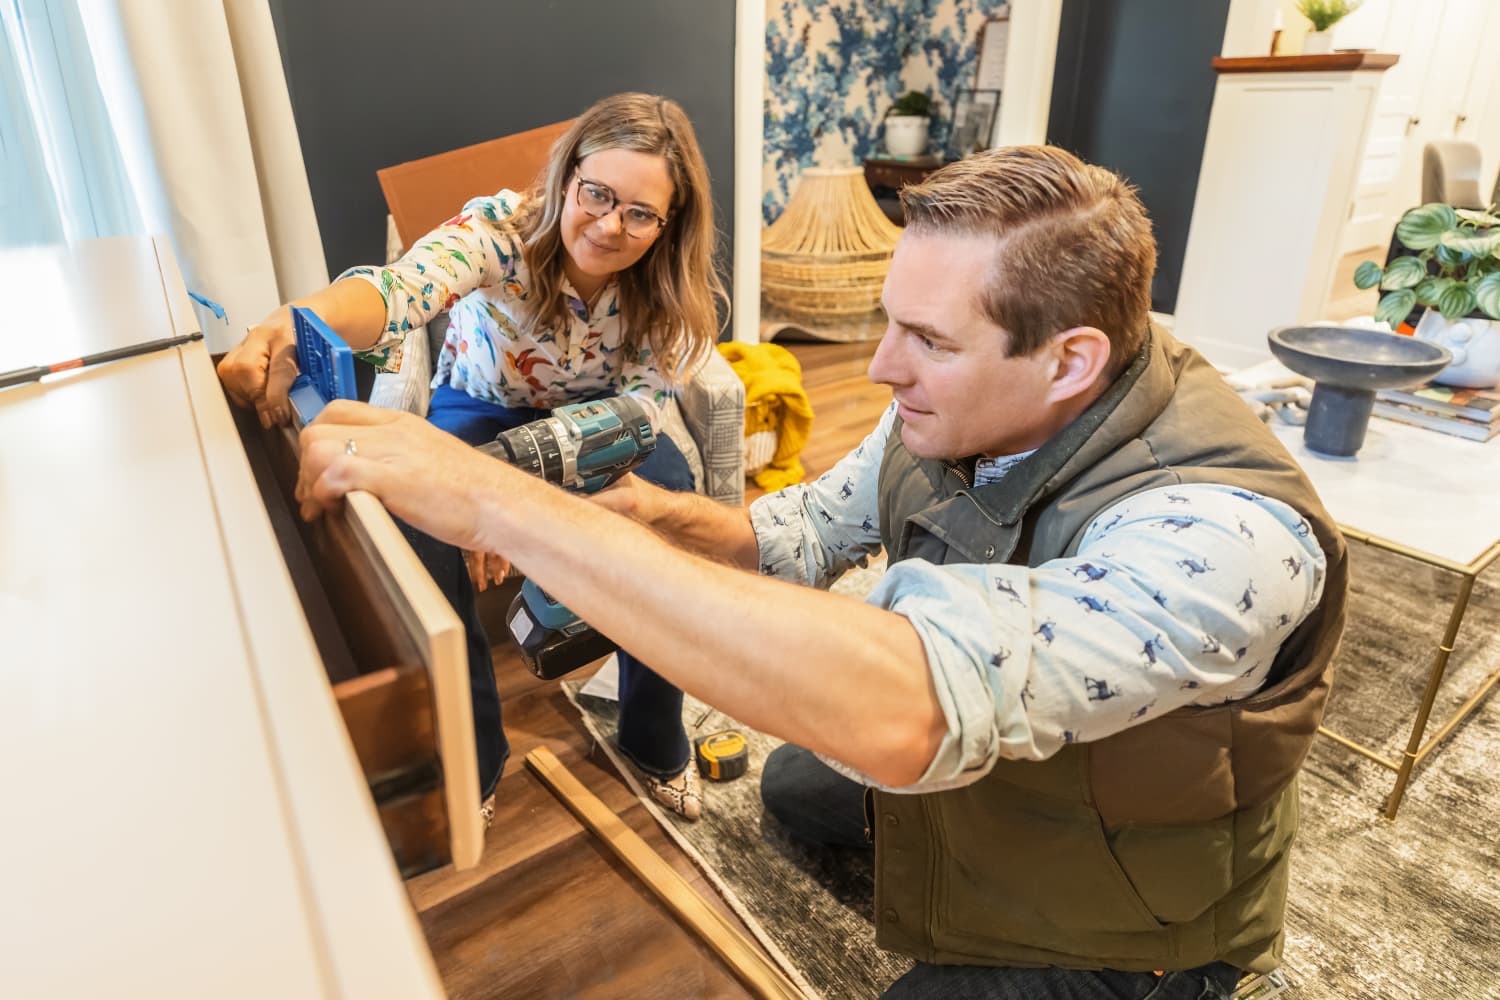 How to Decide Whether to Toss or Upcycle Furniture, According to HGTV Experts